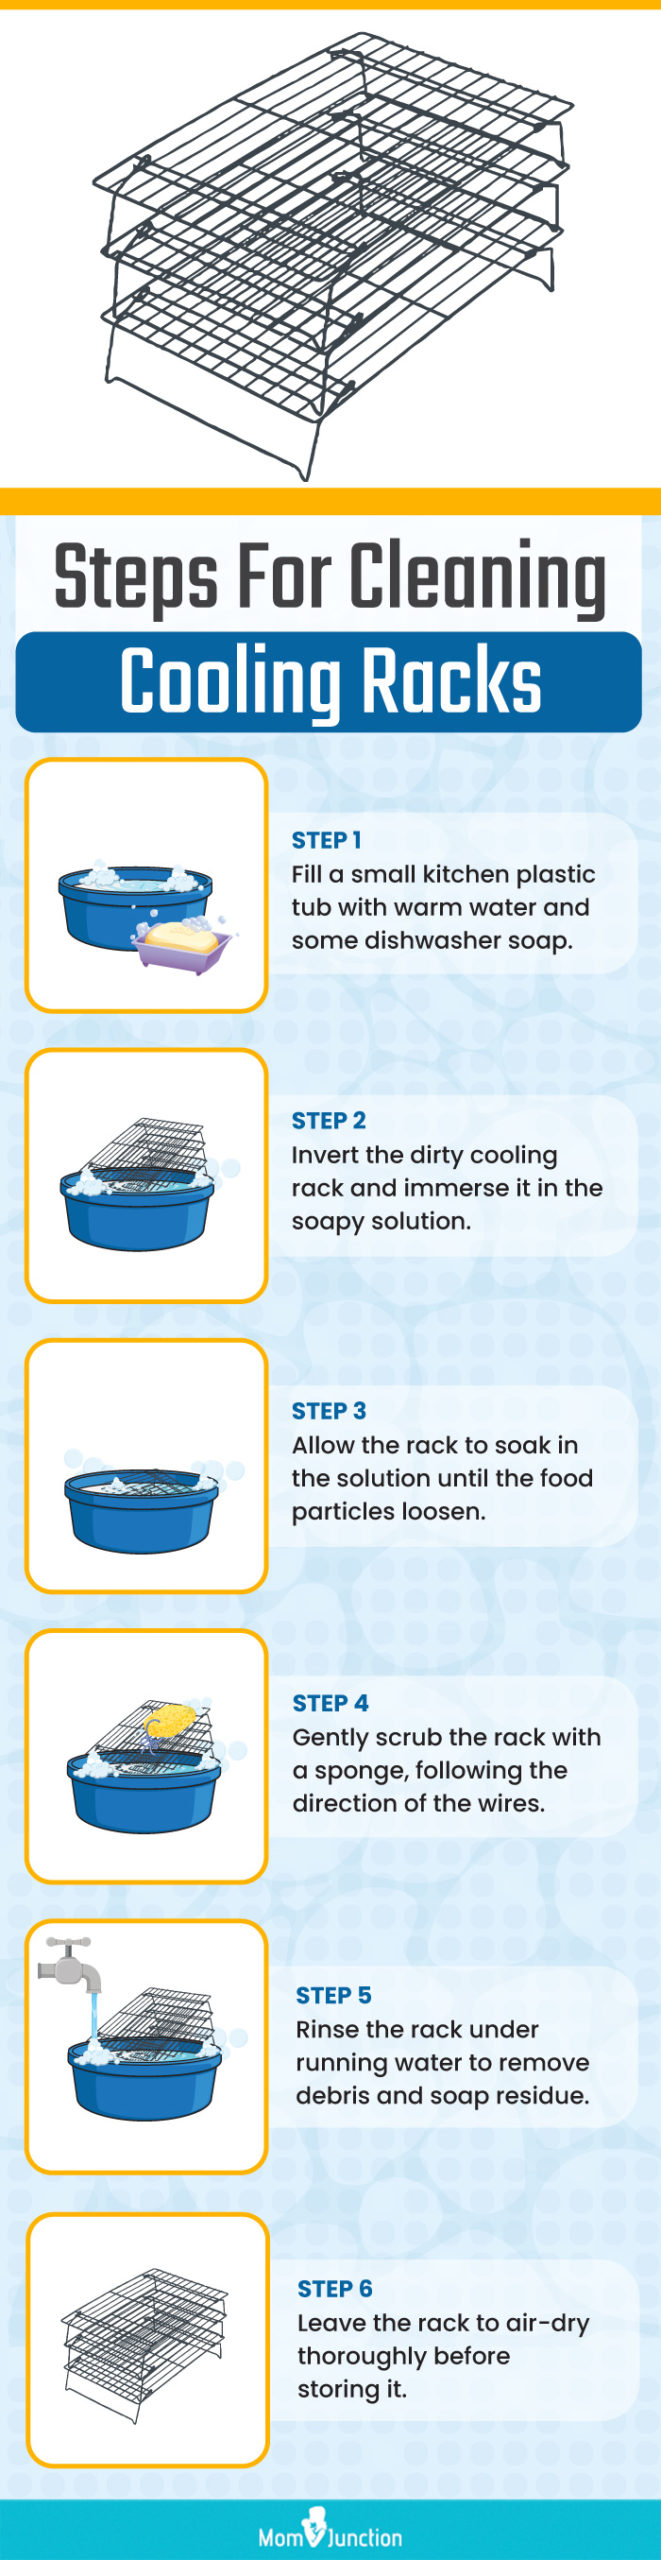 Steps For Cleaning Cooling Racks (infographic)